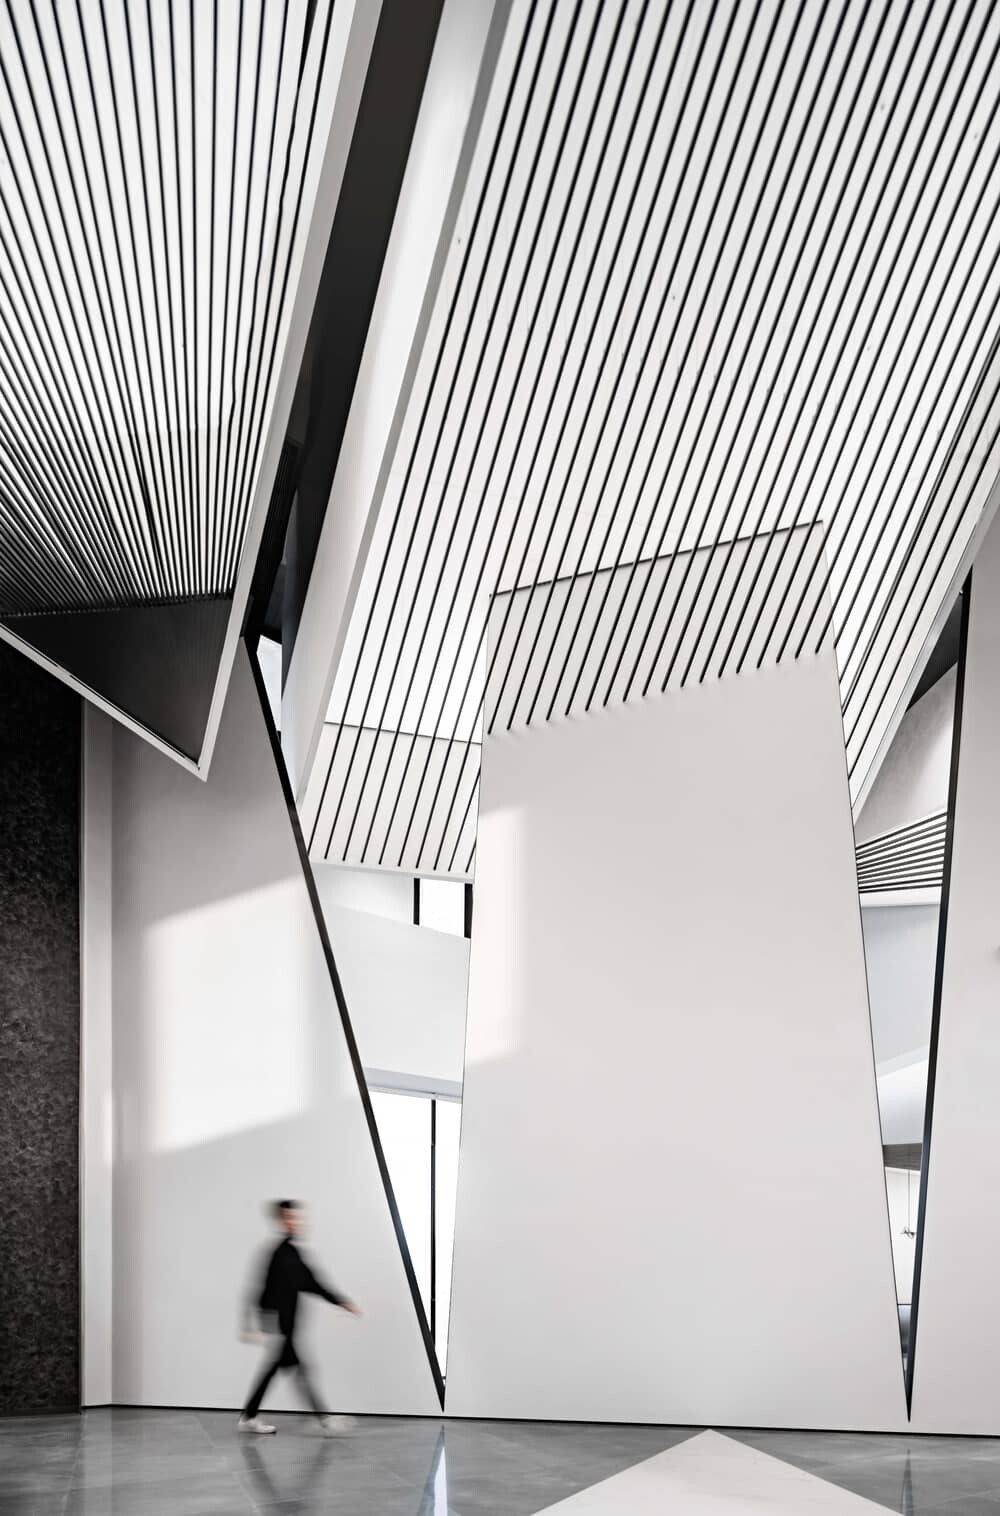 A Minimalist and Futuristic Sales Office from Shanghai